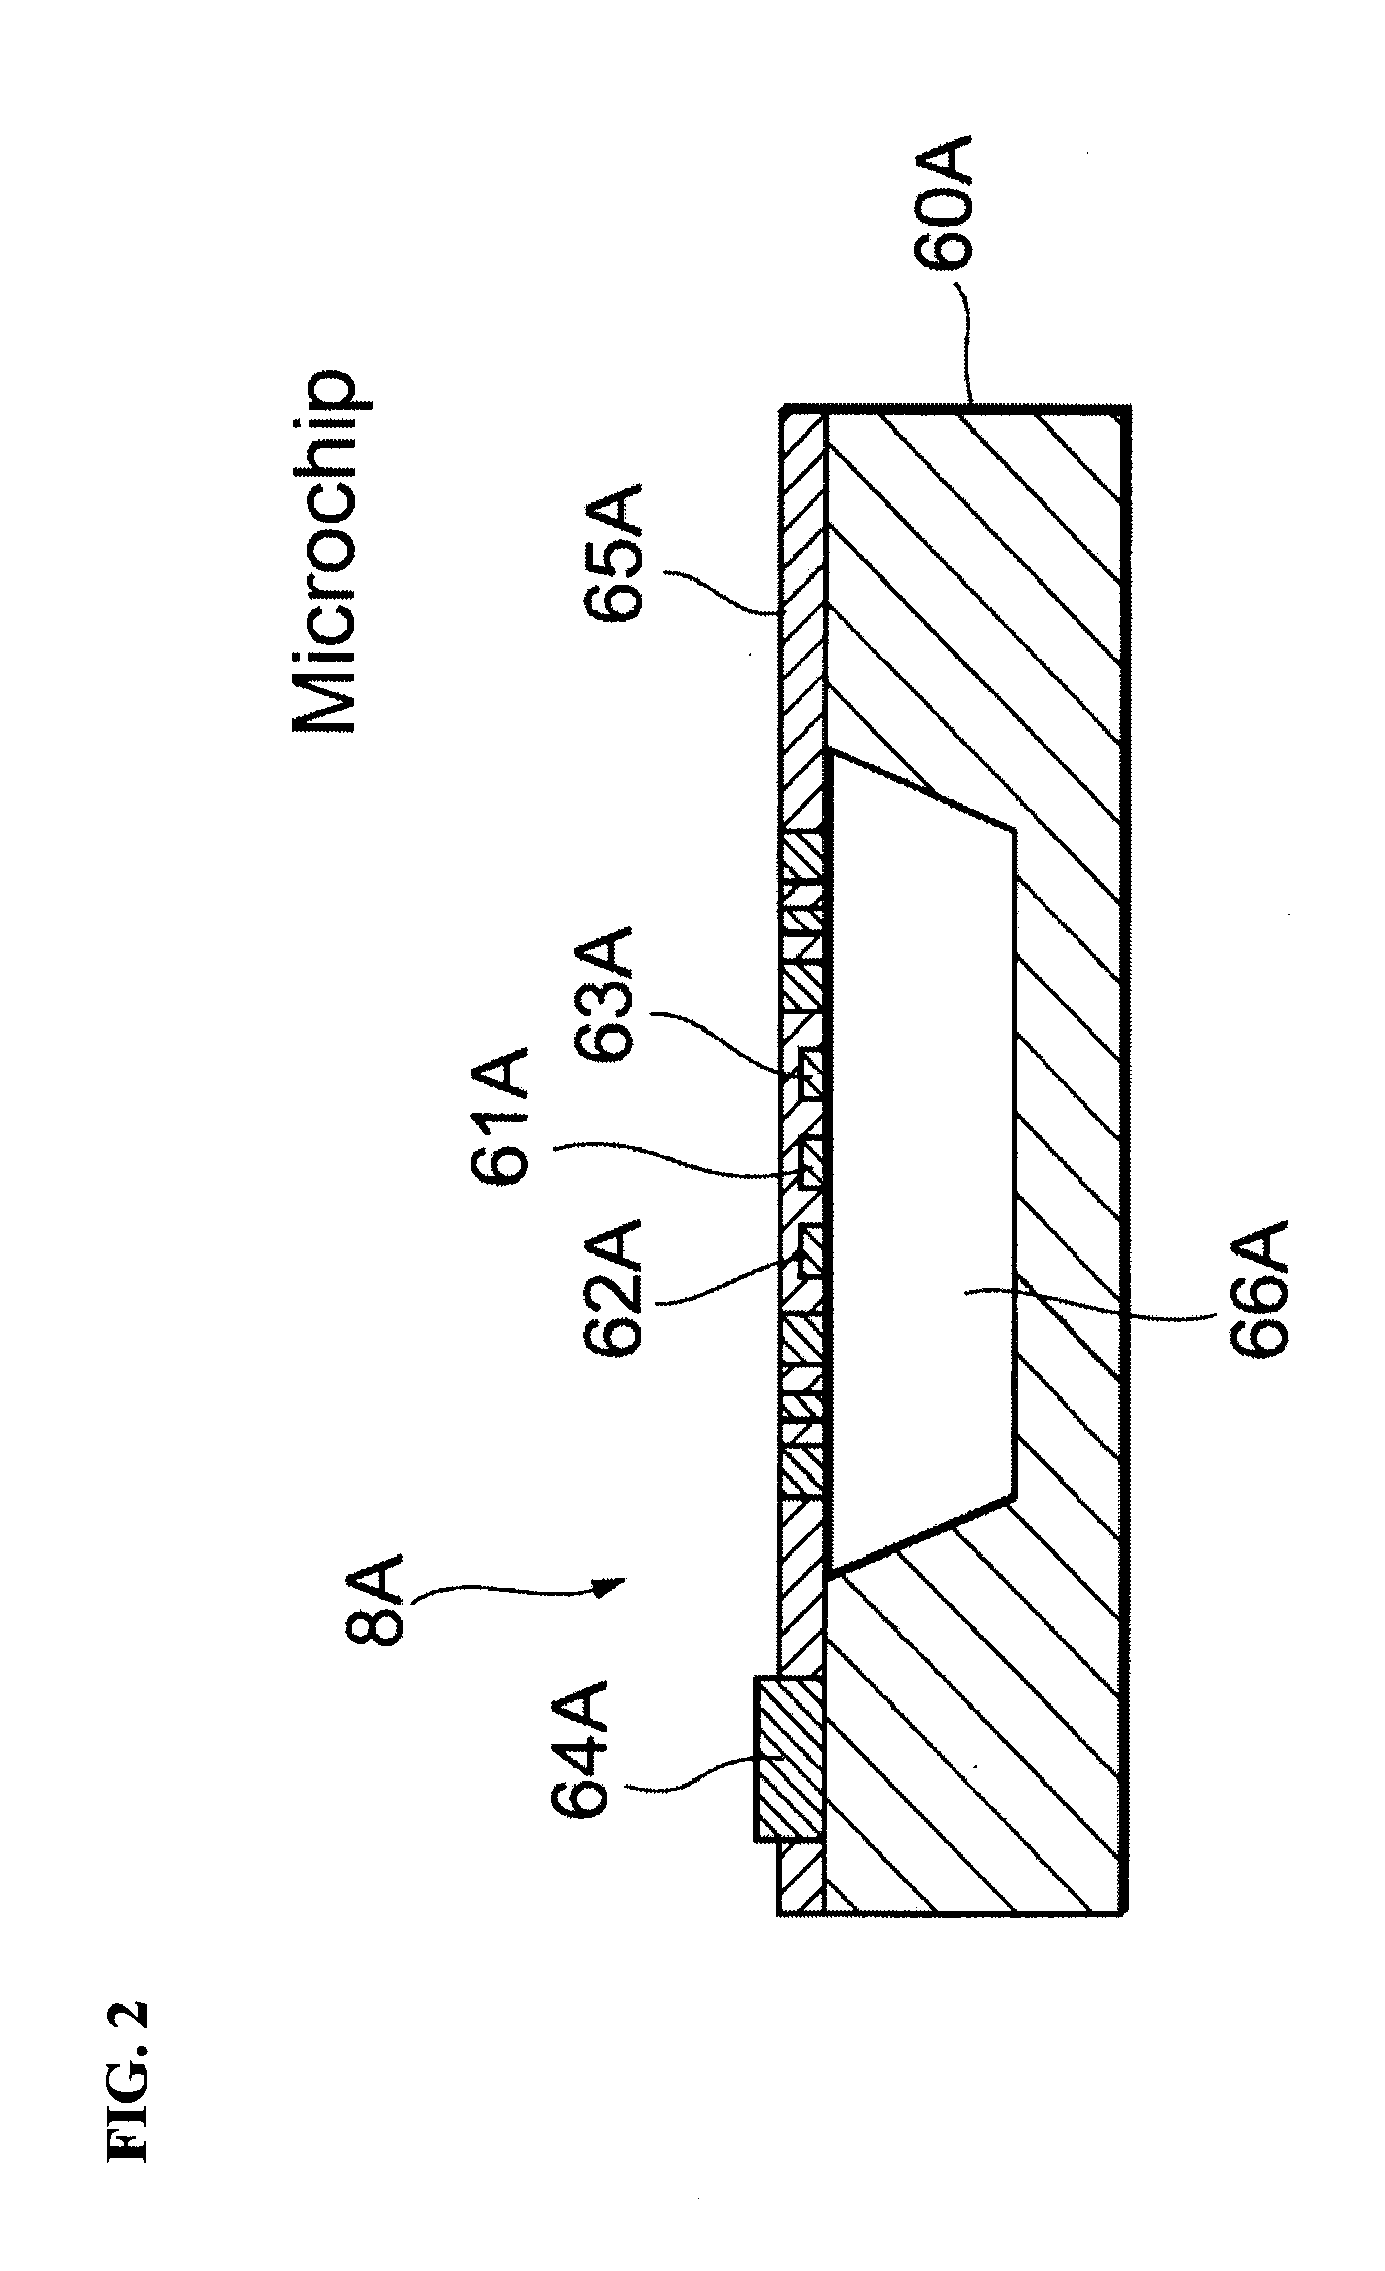 Thermal diffusivity measuring system, concentration of caloric component measuring system, and flow rate measuring system